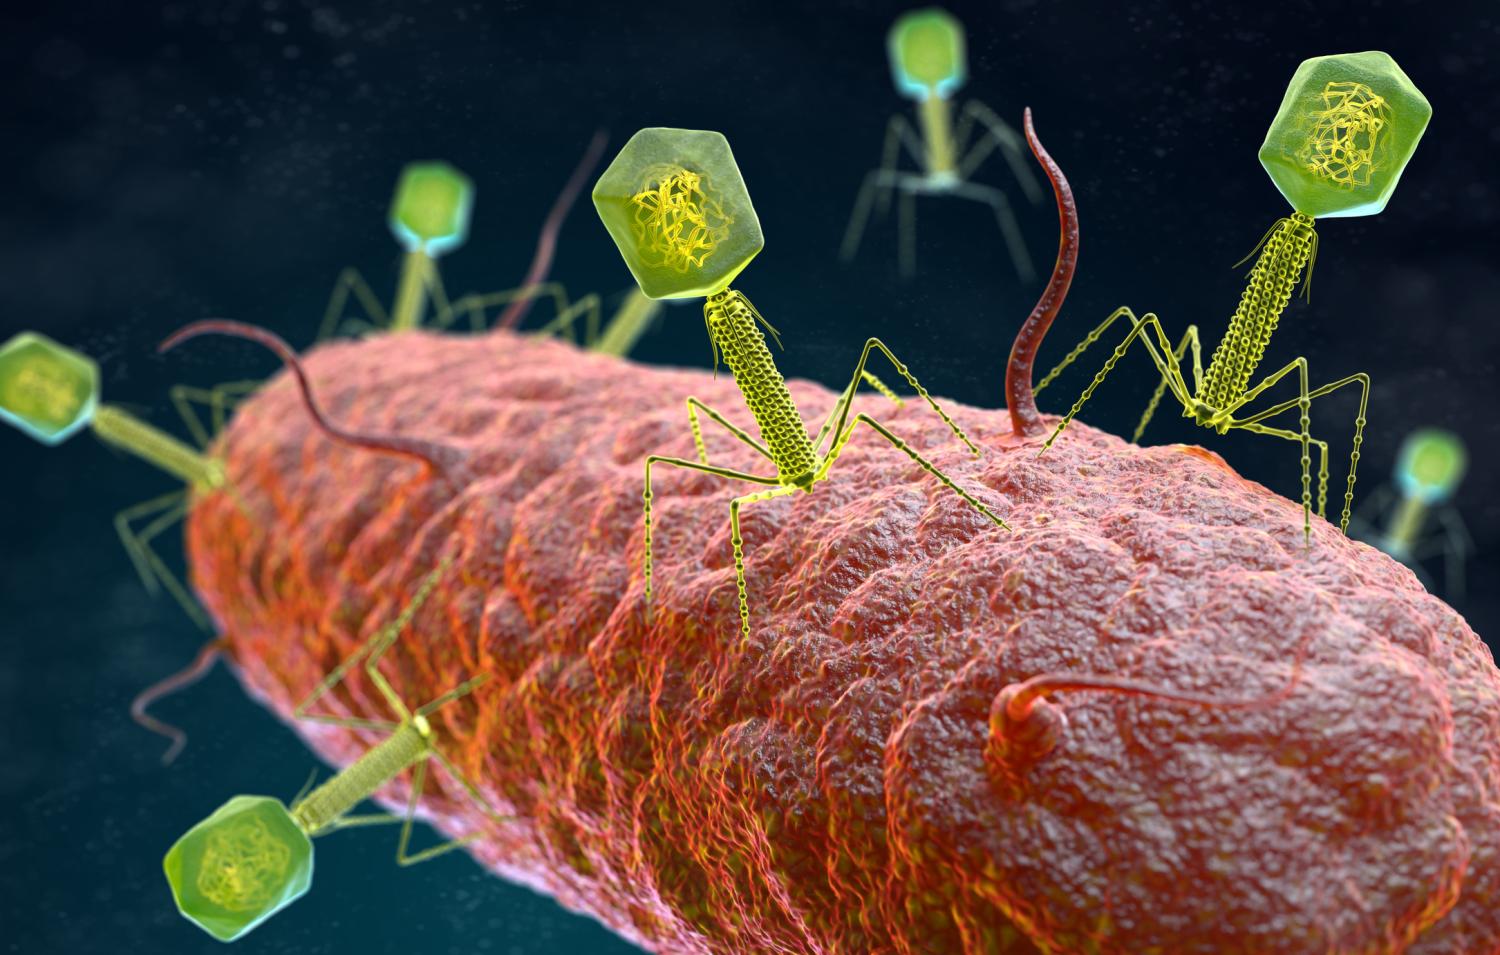 Bacteriophages attacking bacteria